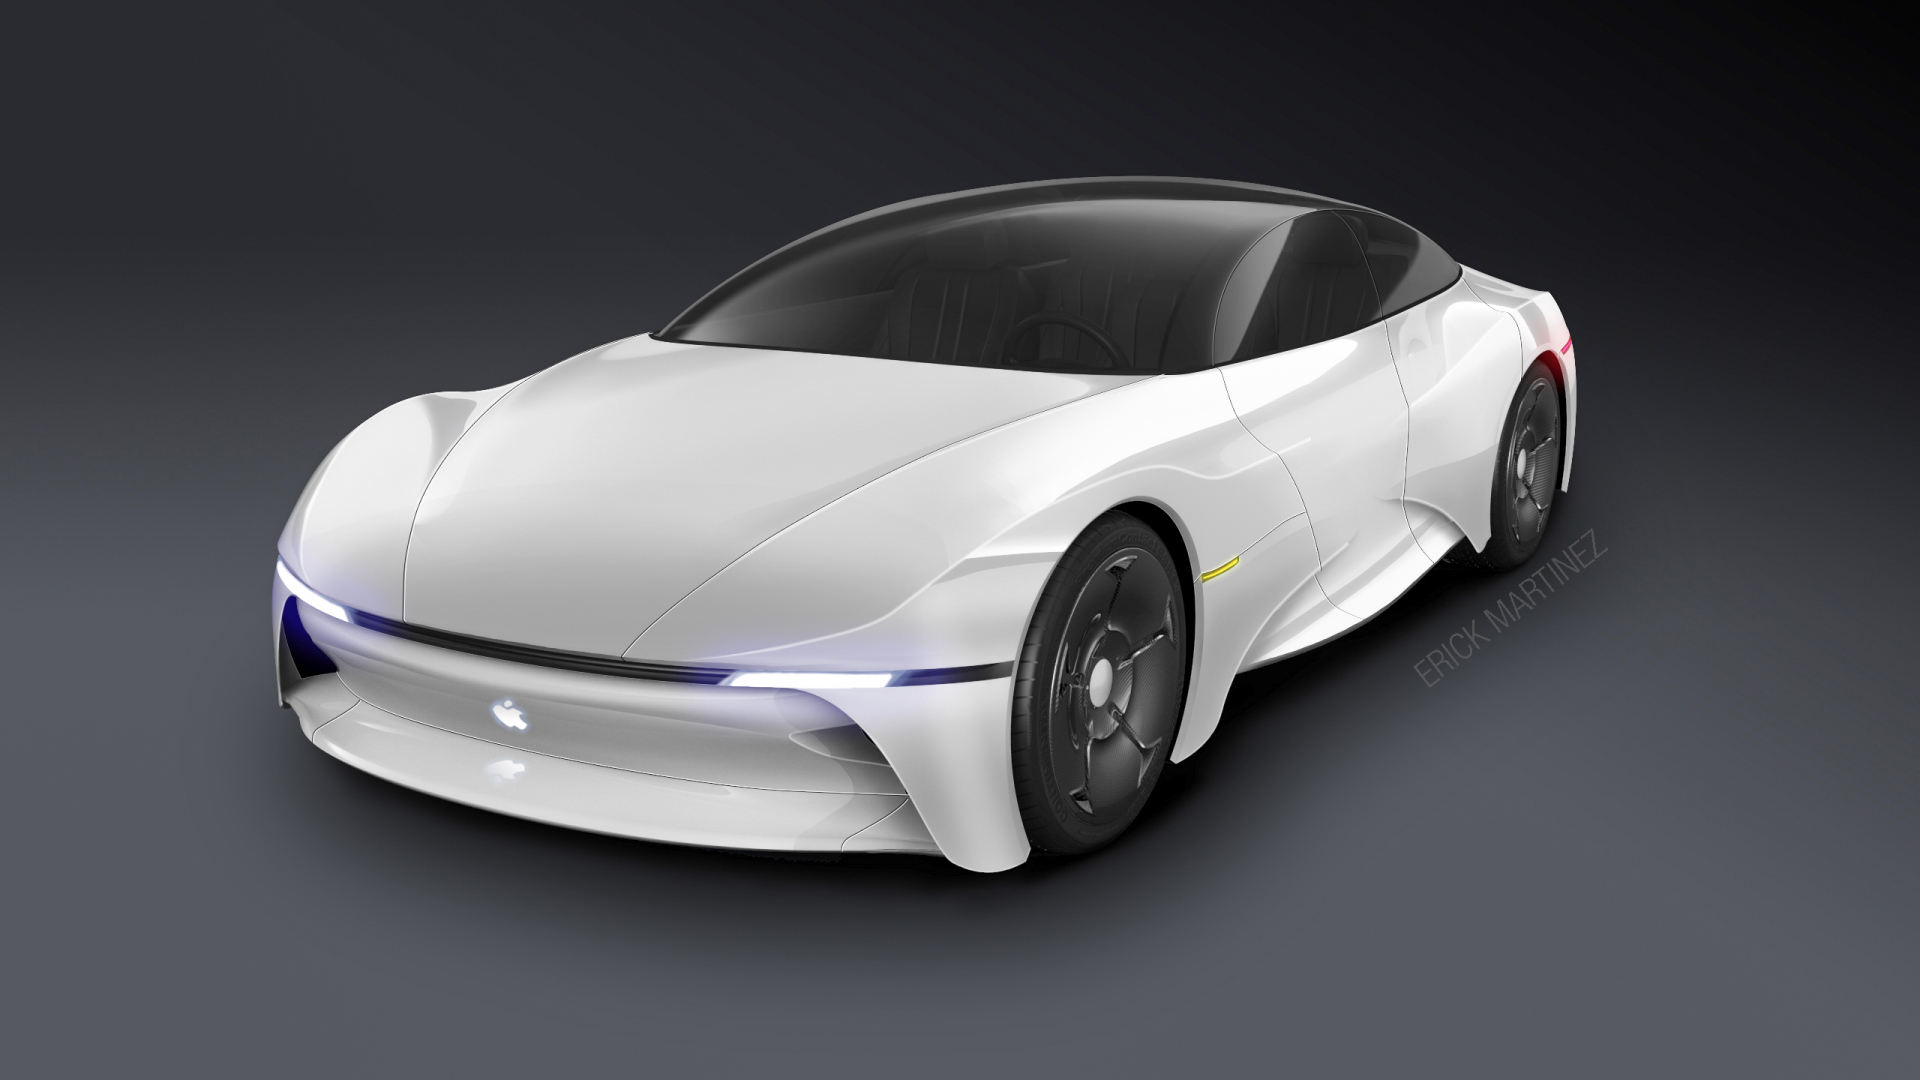 project titan apple car now expected to launch in 2025 2027 at the earliest 153629 1